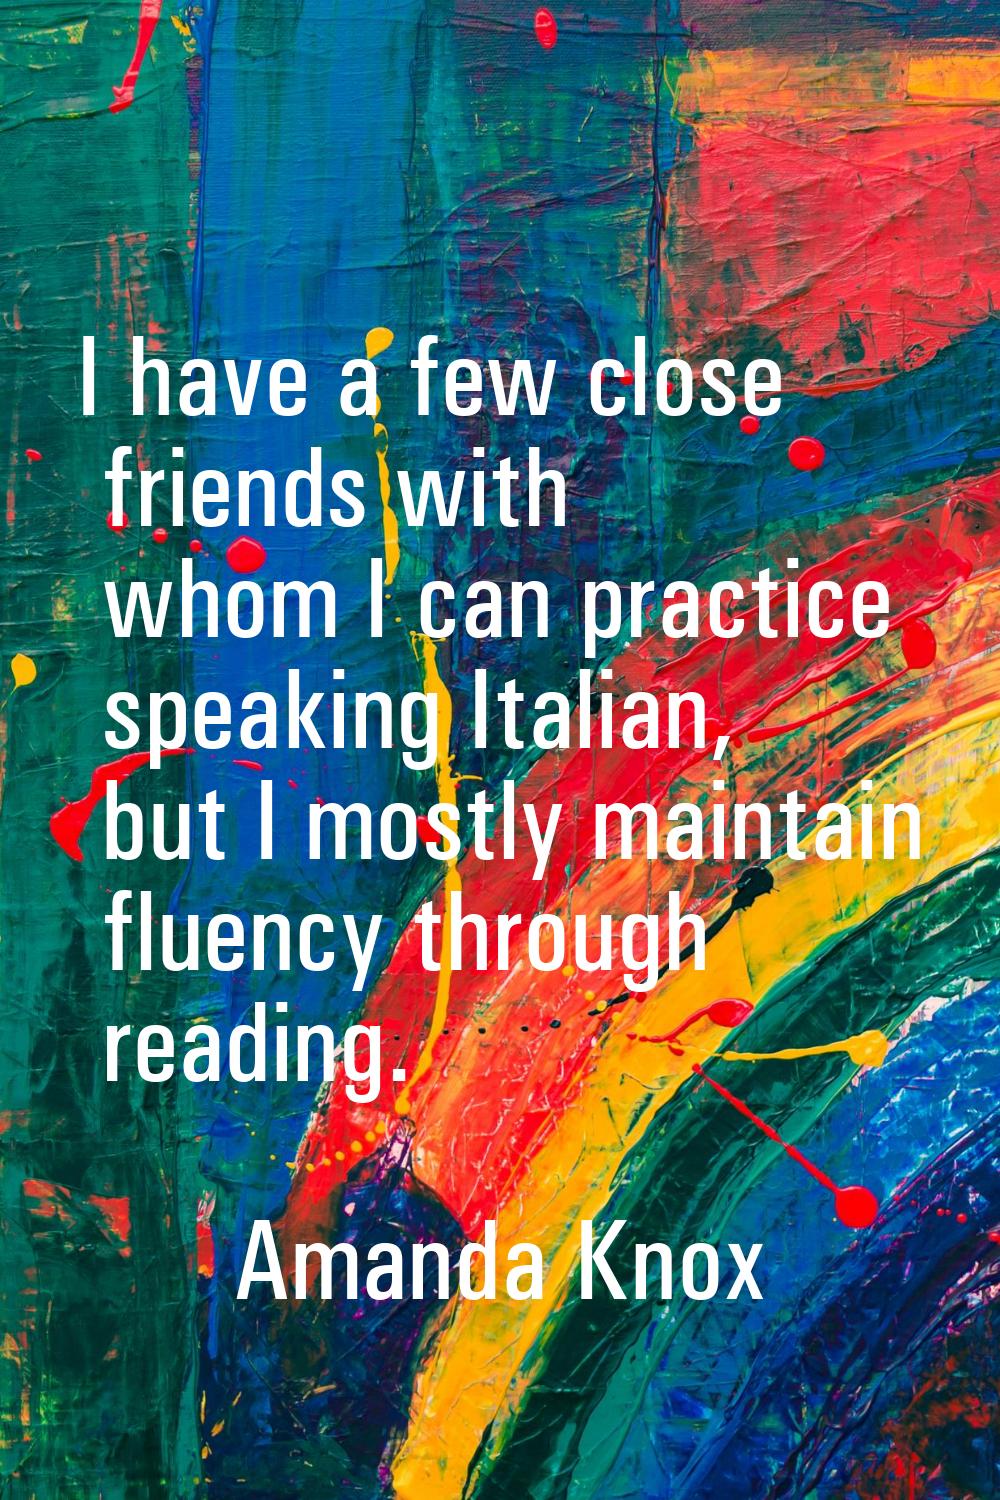 I have a few close friends with whom I can practice speaking Italian, but I mostly maintain fluency